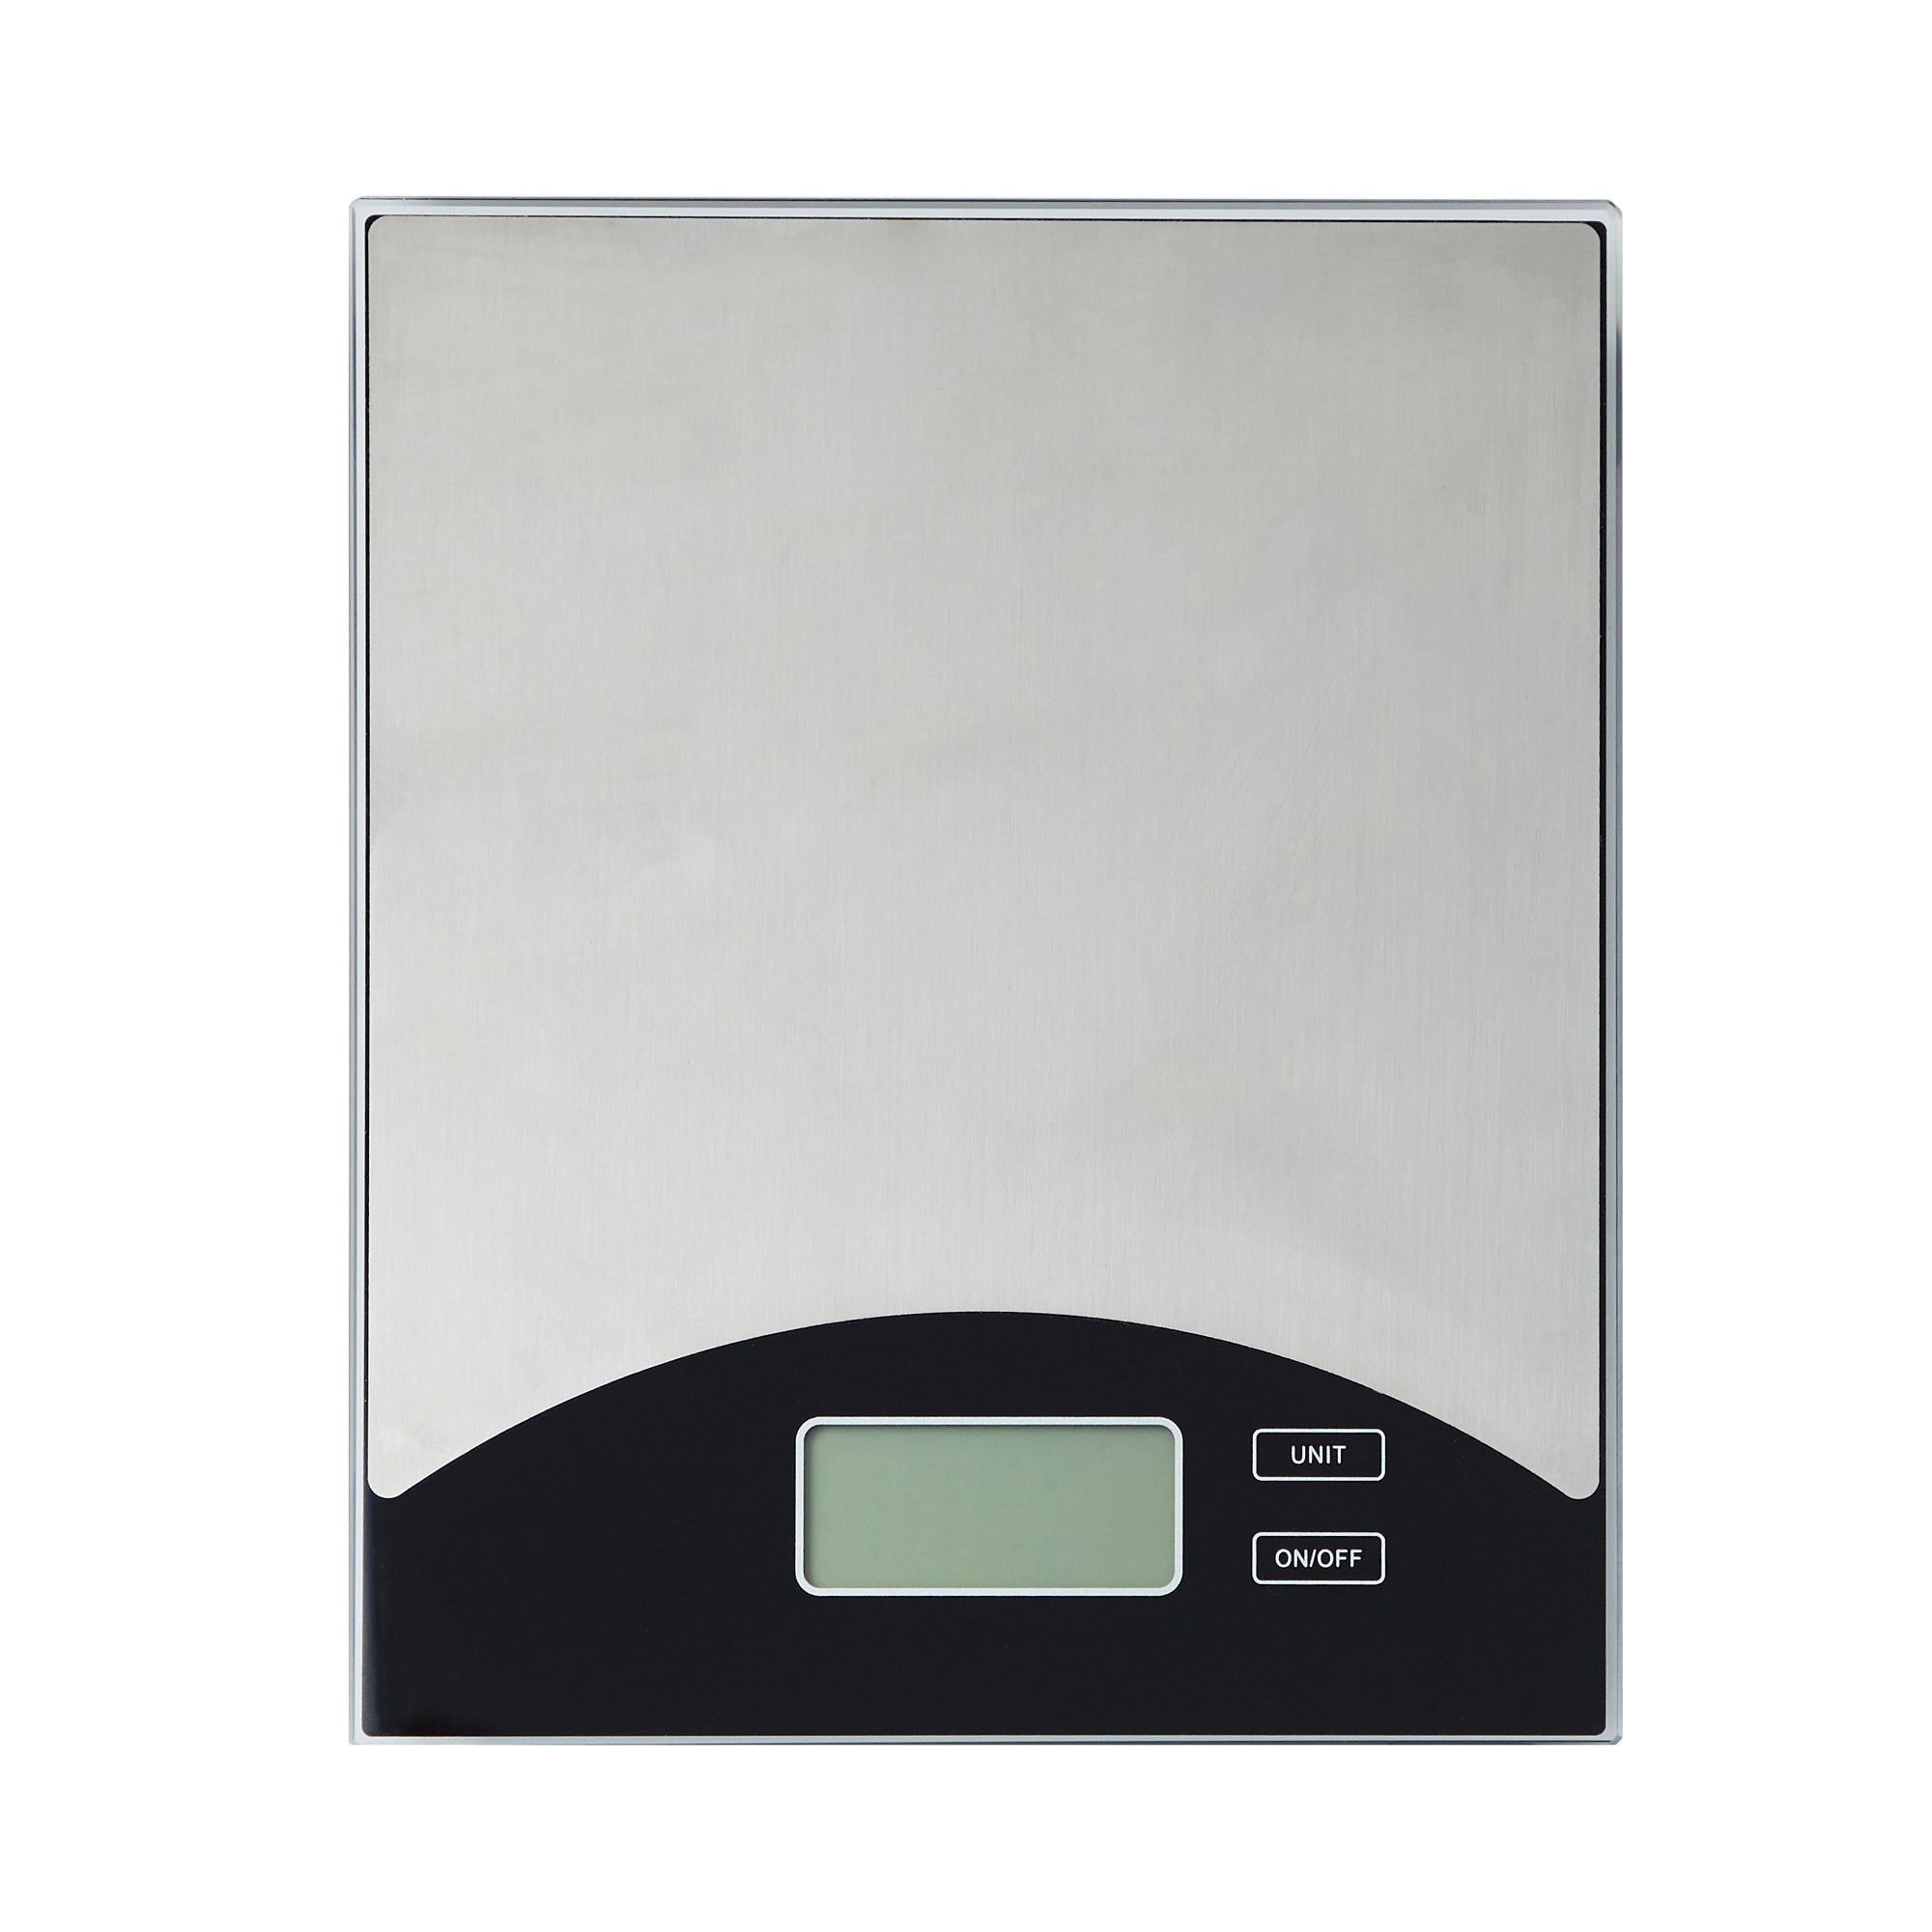 Dunelm Stainless Steel Electronic Kitchen Scales